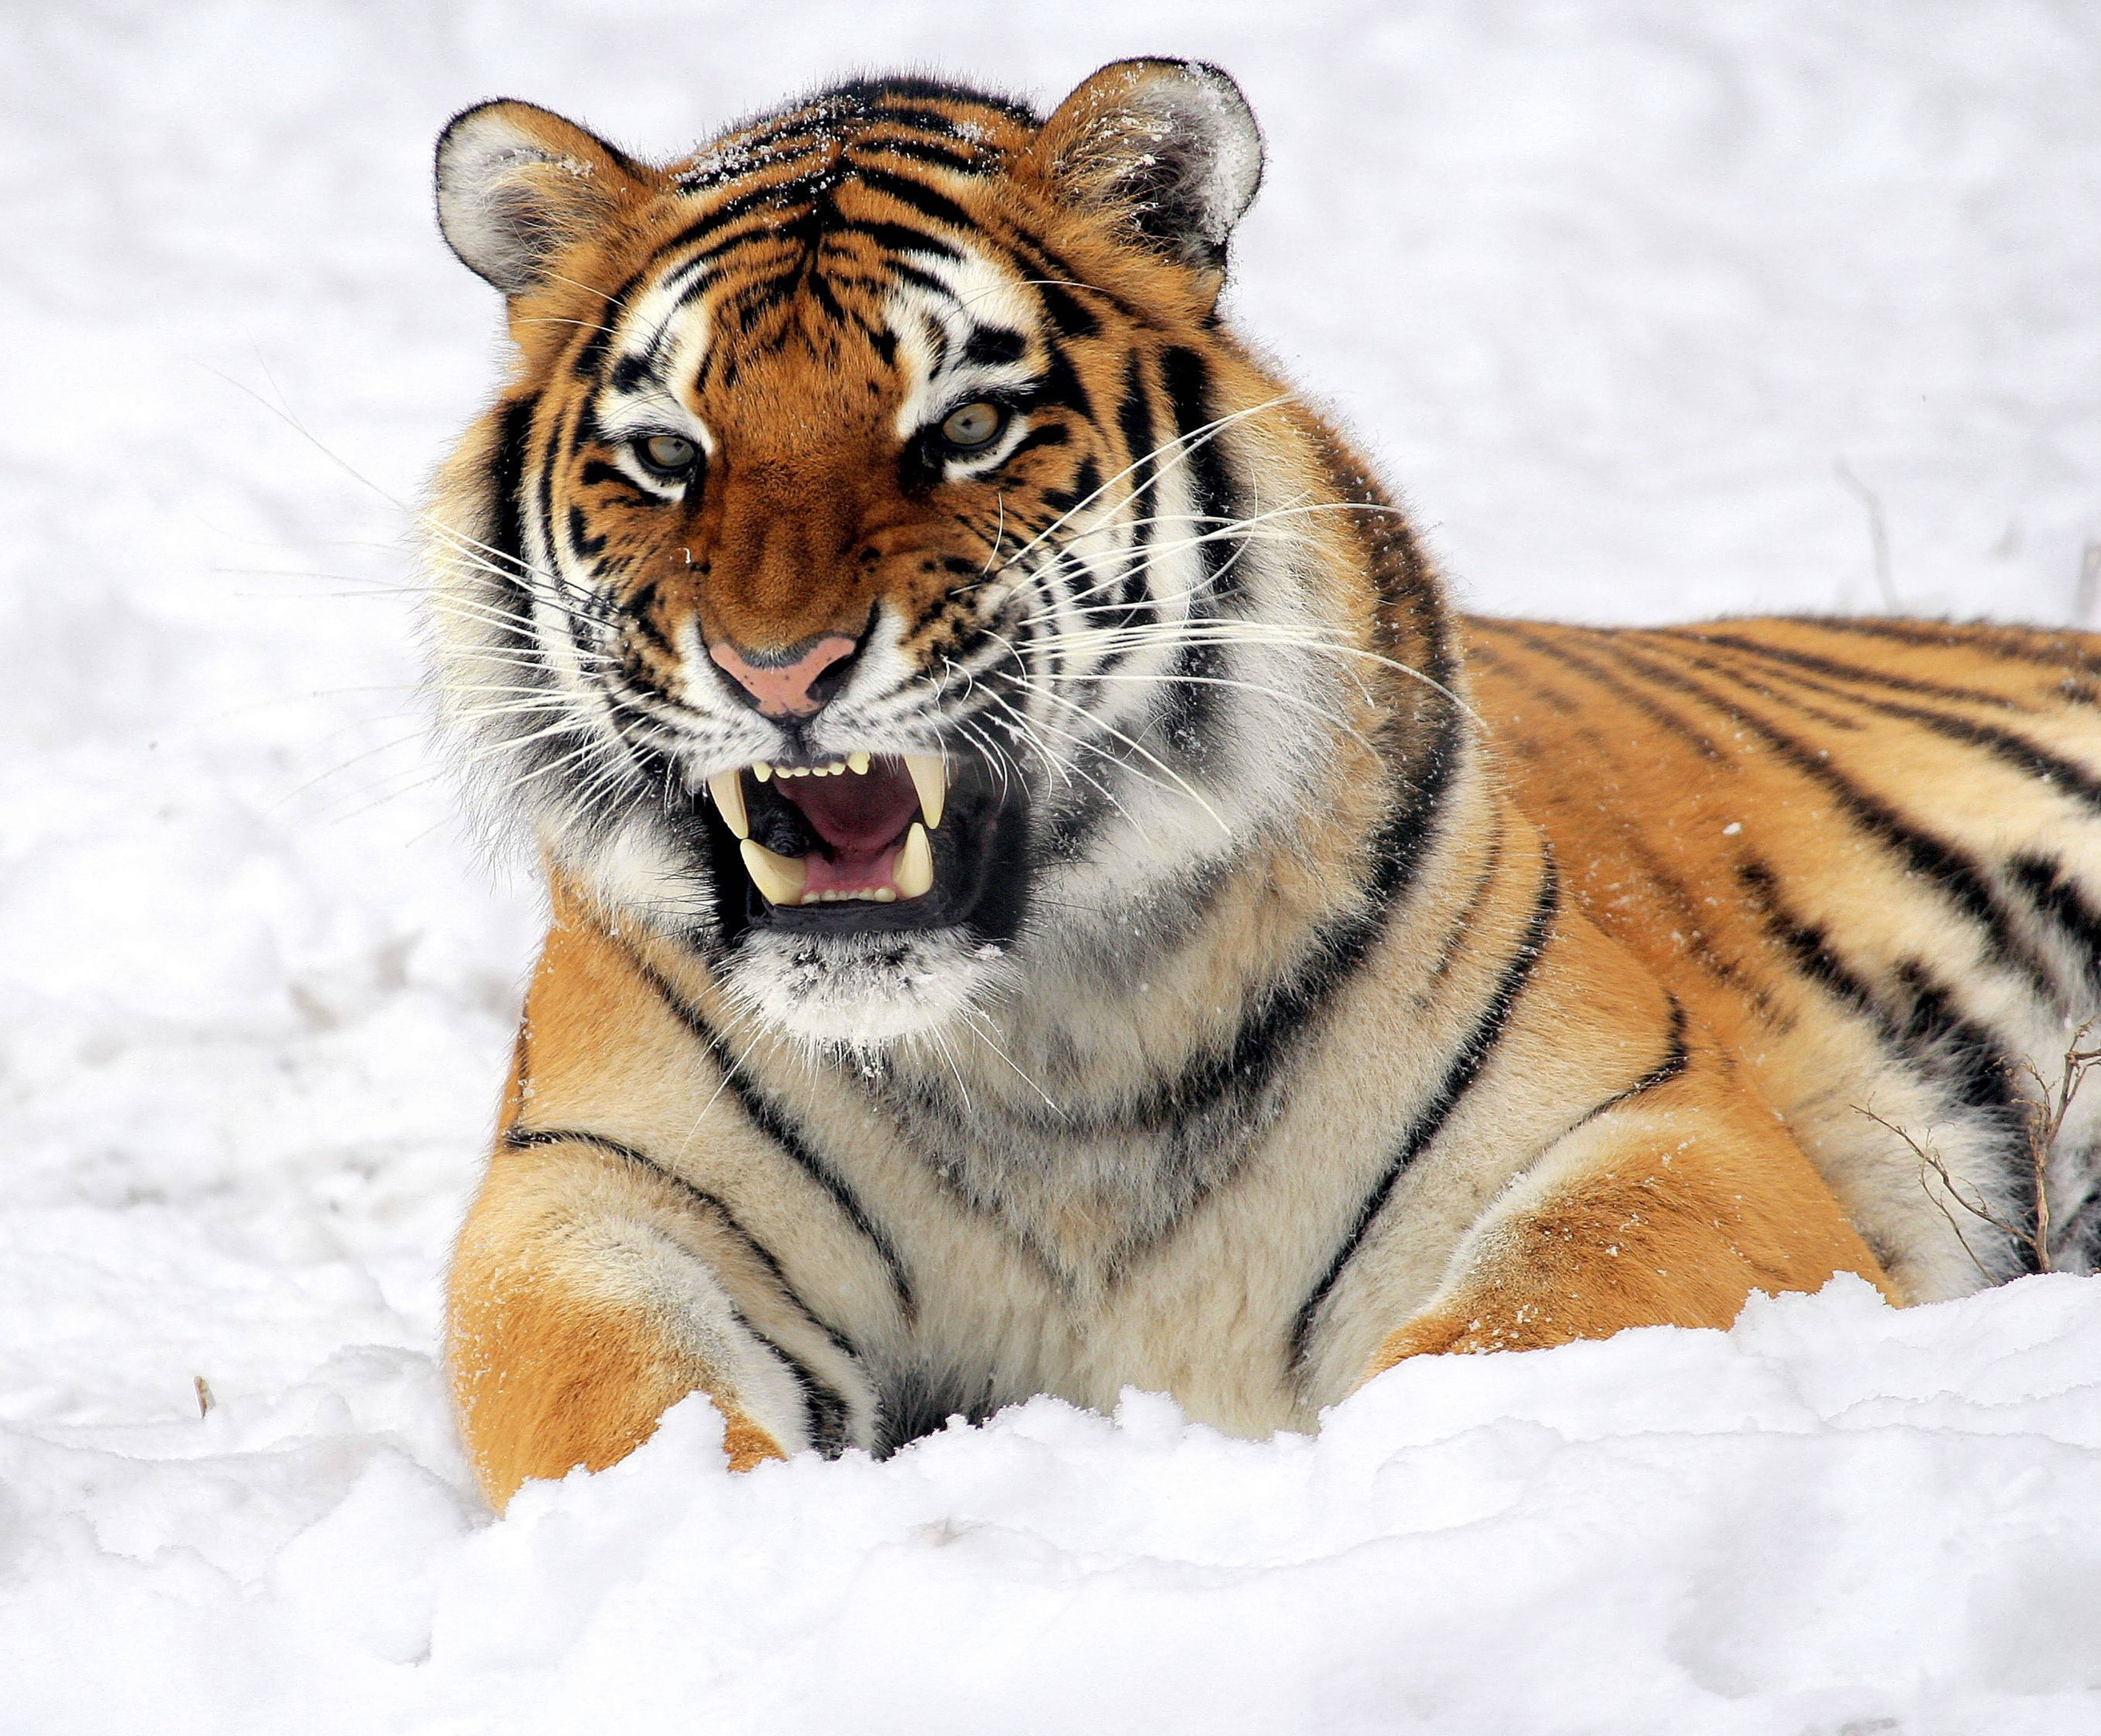 Free Tiger Wallpaper Downloads, [500+] Tiger Wallpapers for FREE |  